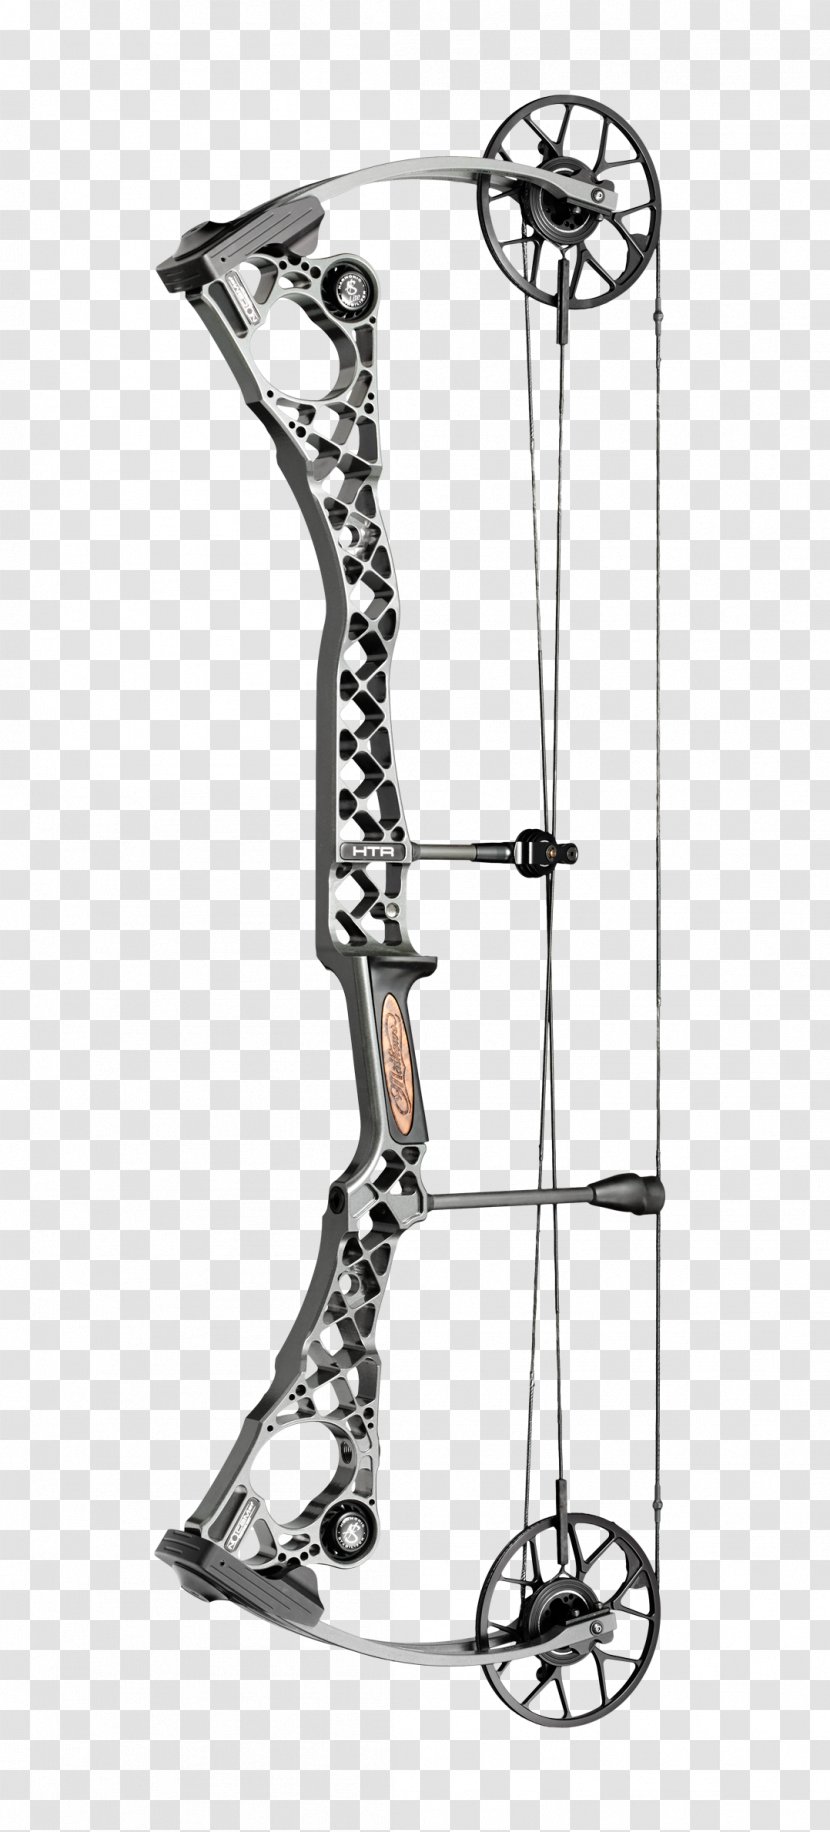 Mathews Archery, Inc. Bowhunting Cam Compound Bows - Tree Stands - Archery Transparent PNG